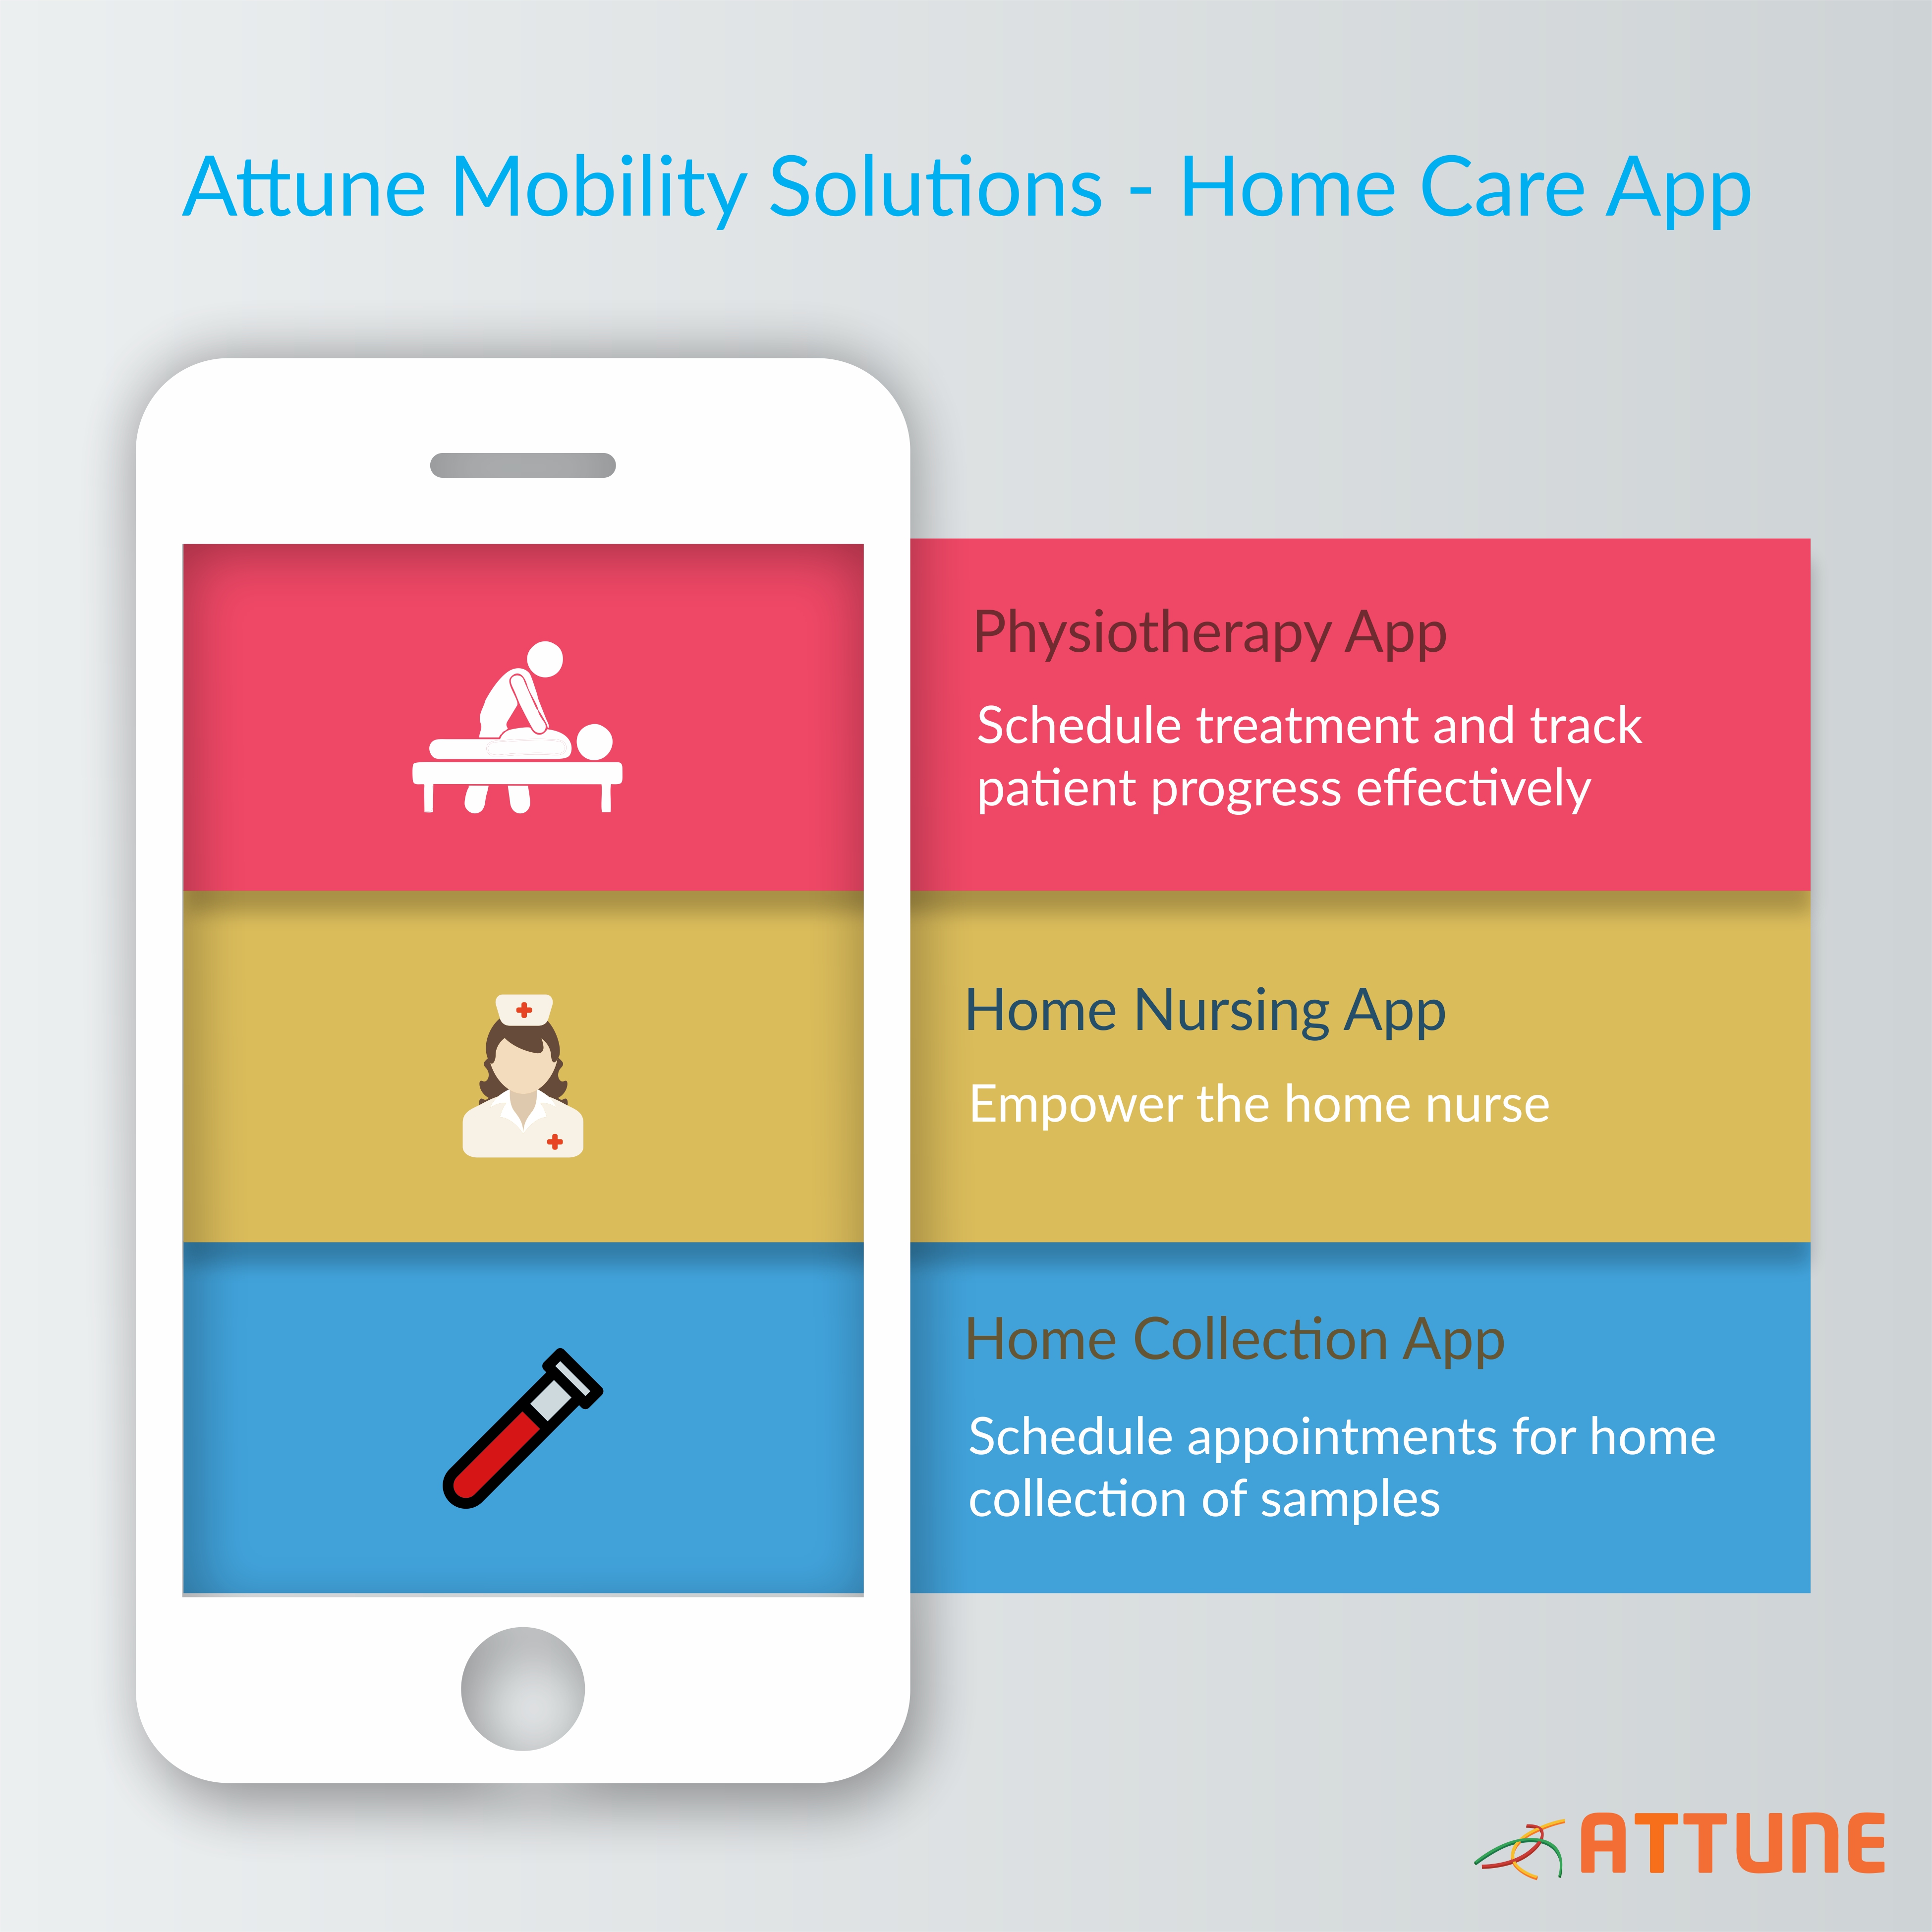 Attune Mobility Solutions - Home Care App